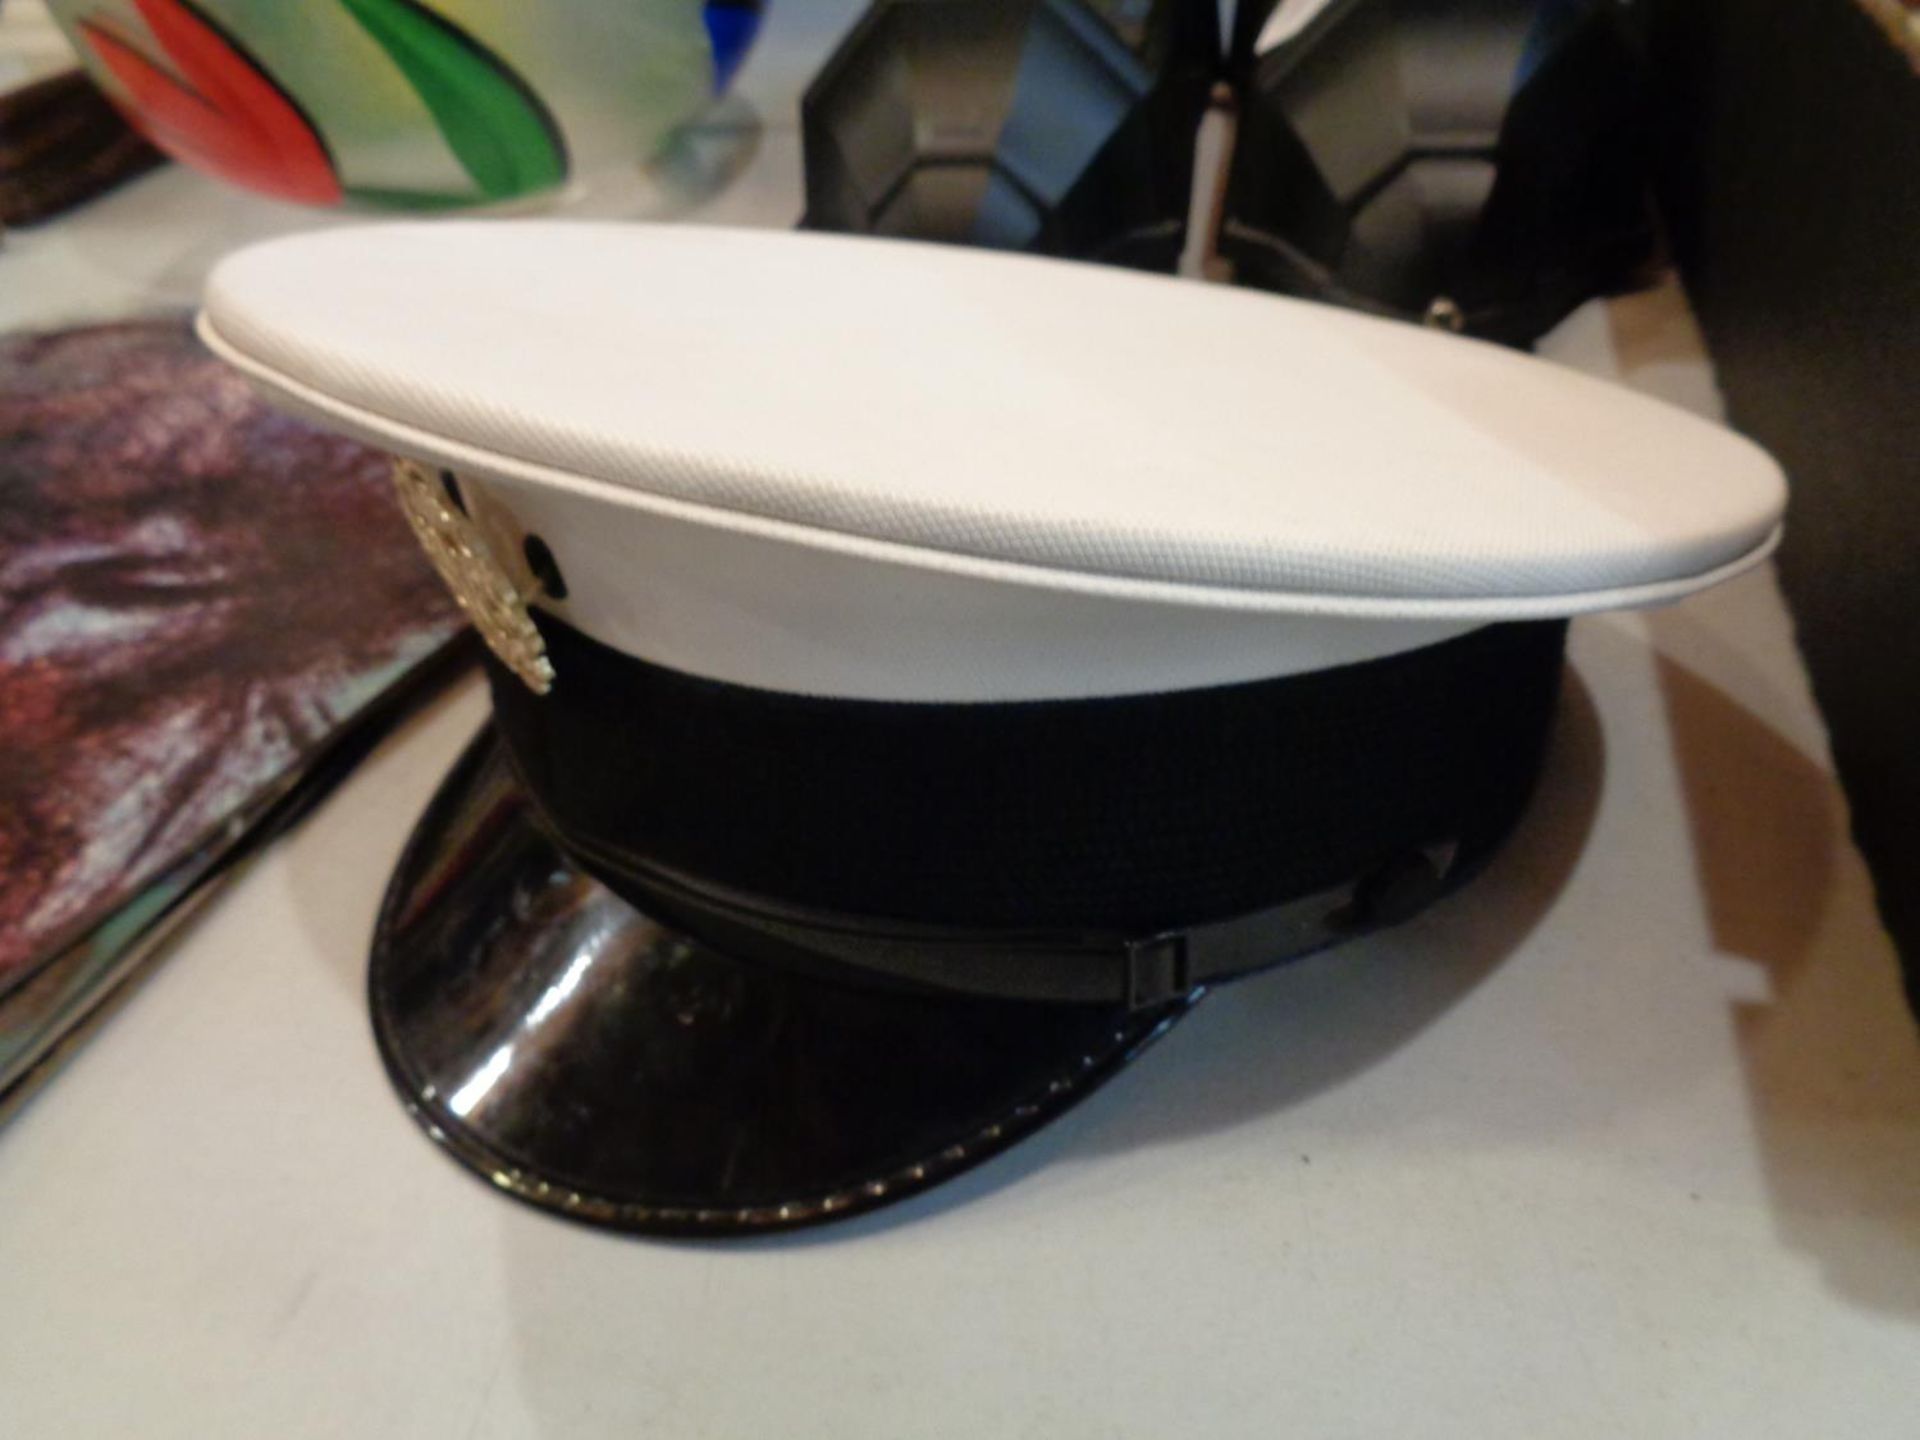 AN RAF POLICE HAT - Image 2 of 3